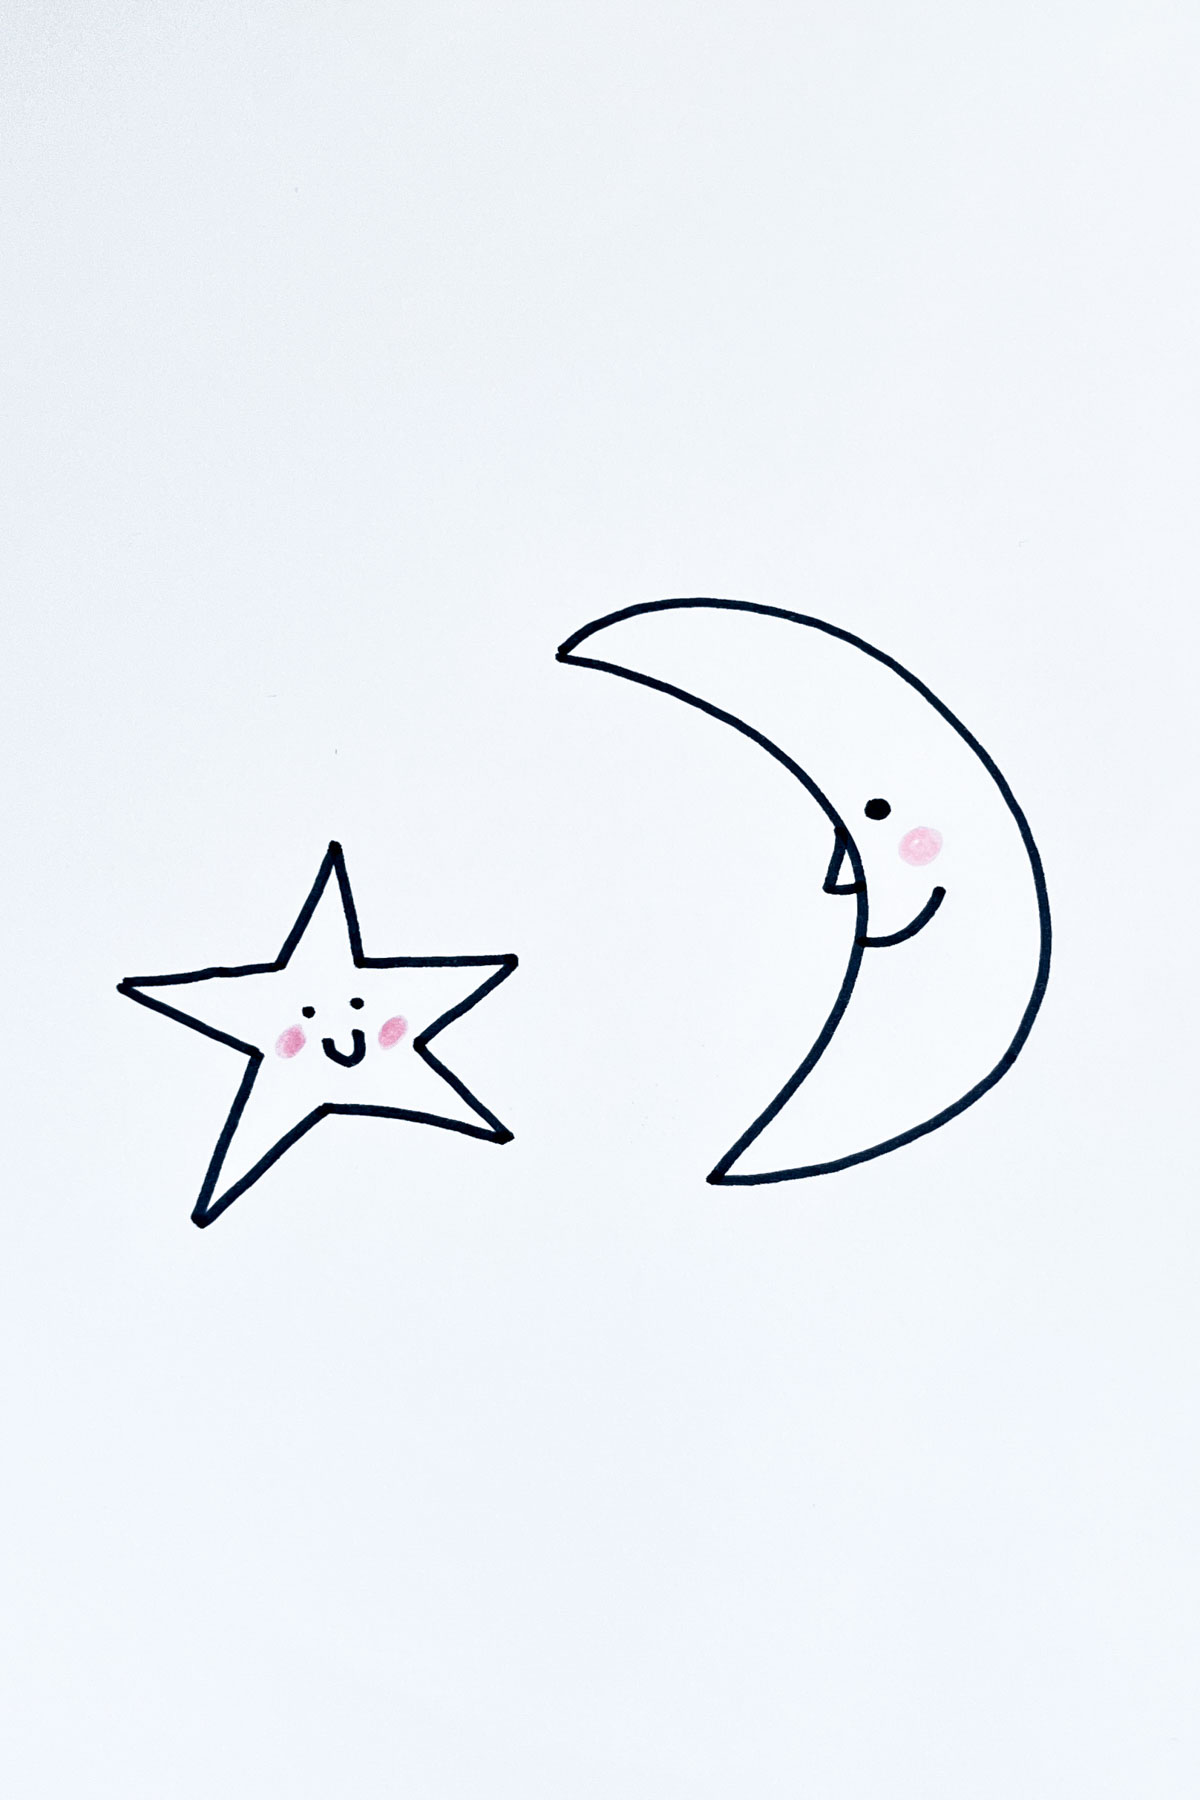 smiling moon and star moon drawing